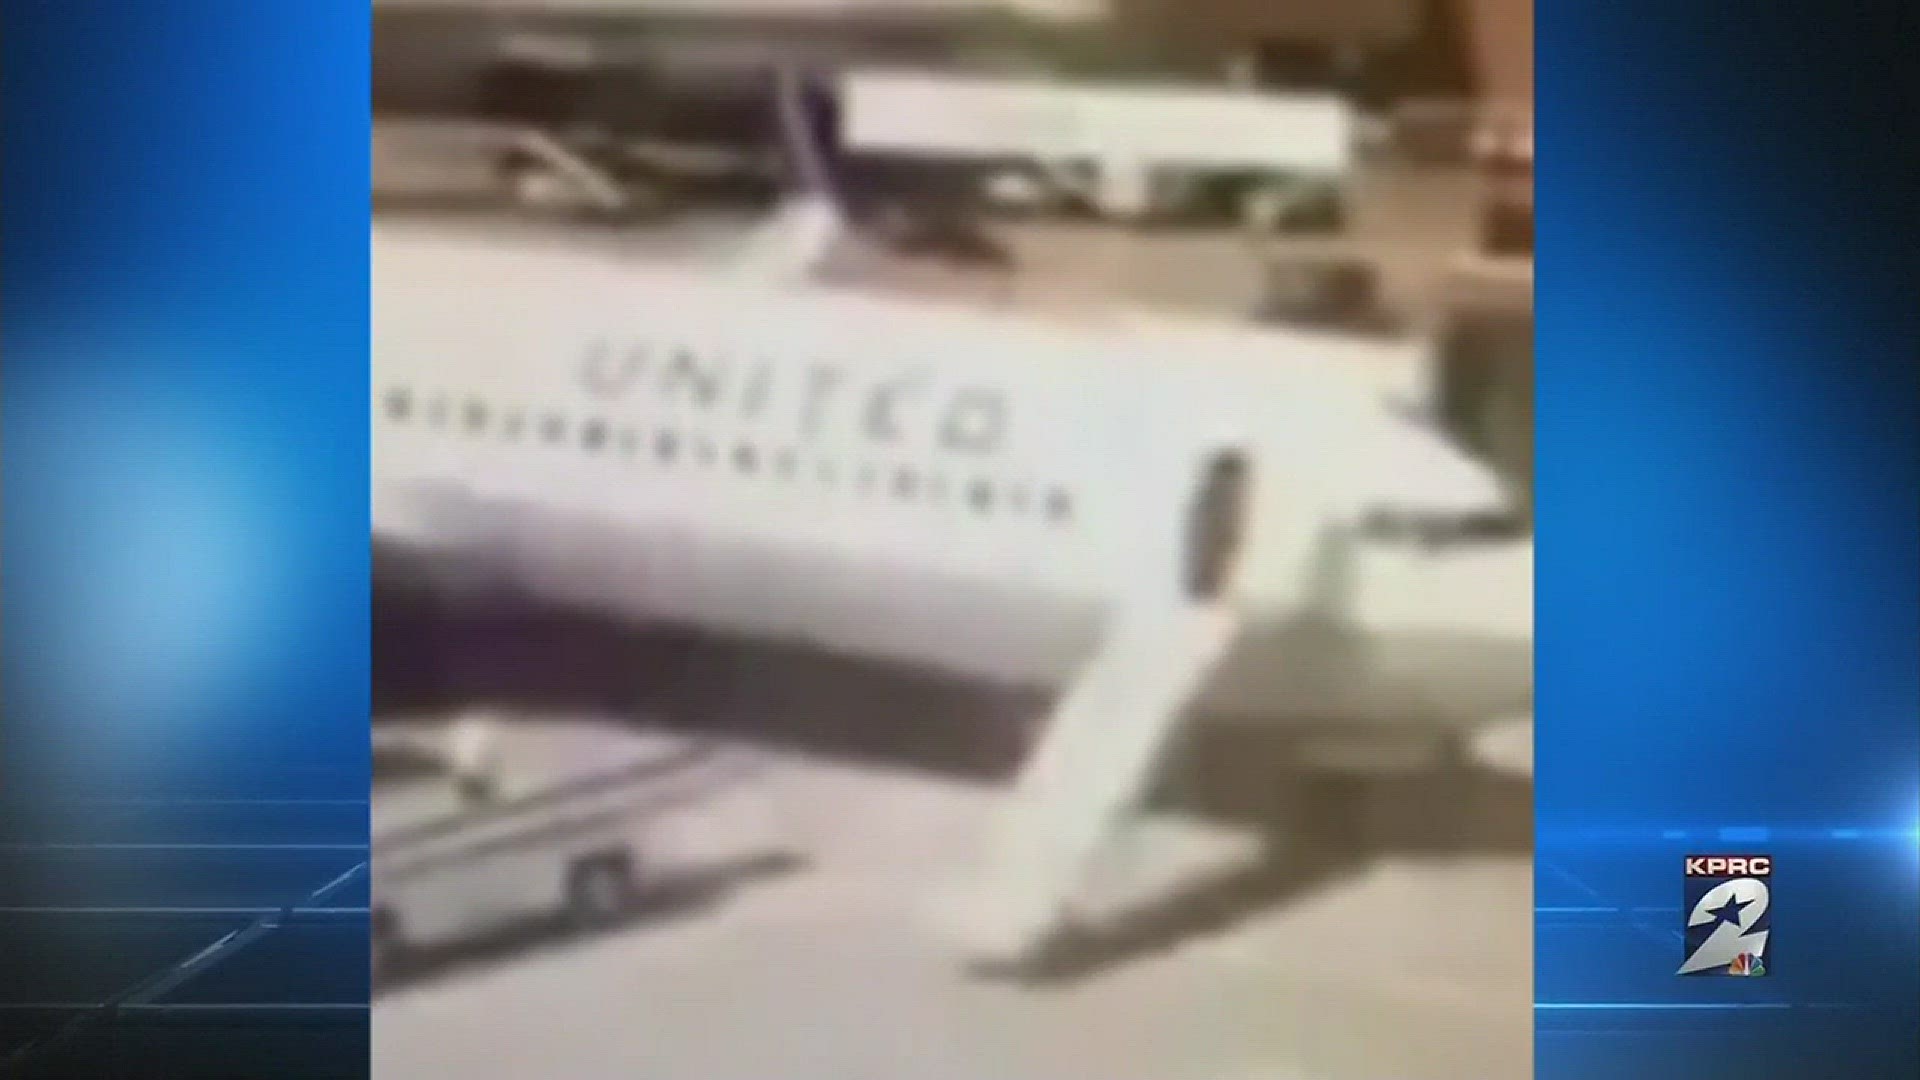 April 5, 2016: Video shows a United Airlines flight attendant opening a plane door and unexpectedly jumping down the emergency slide.